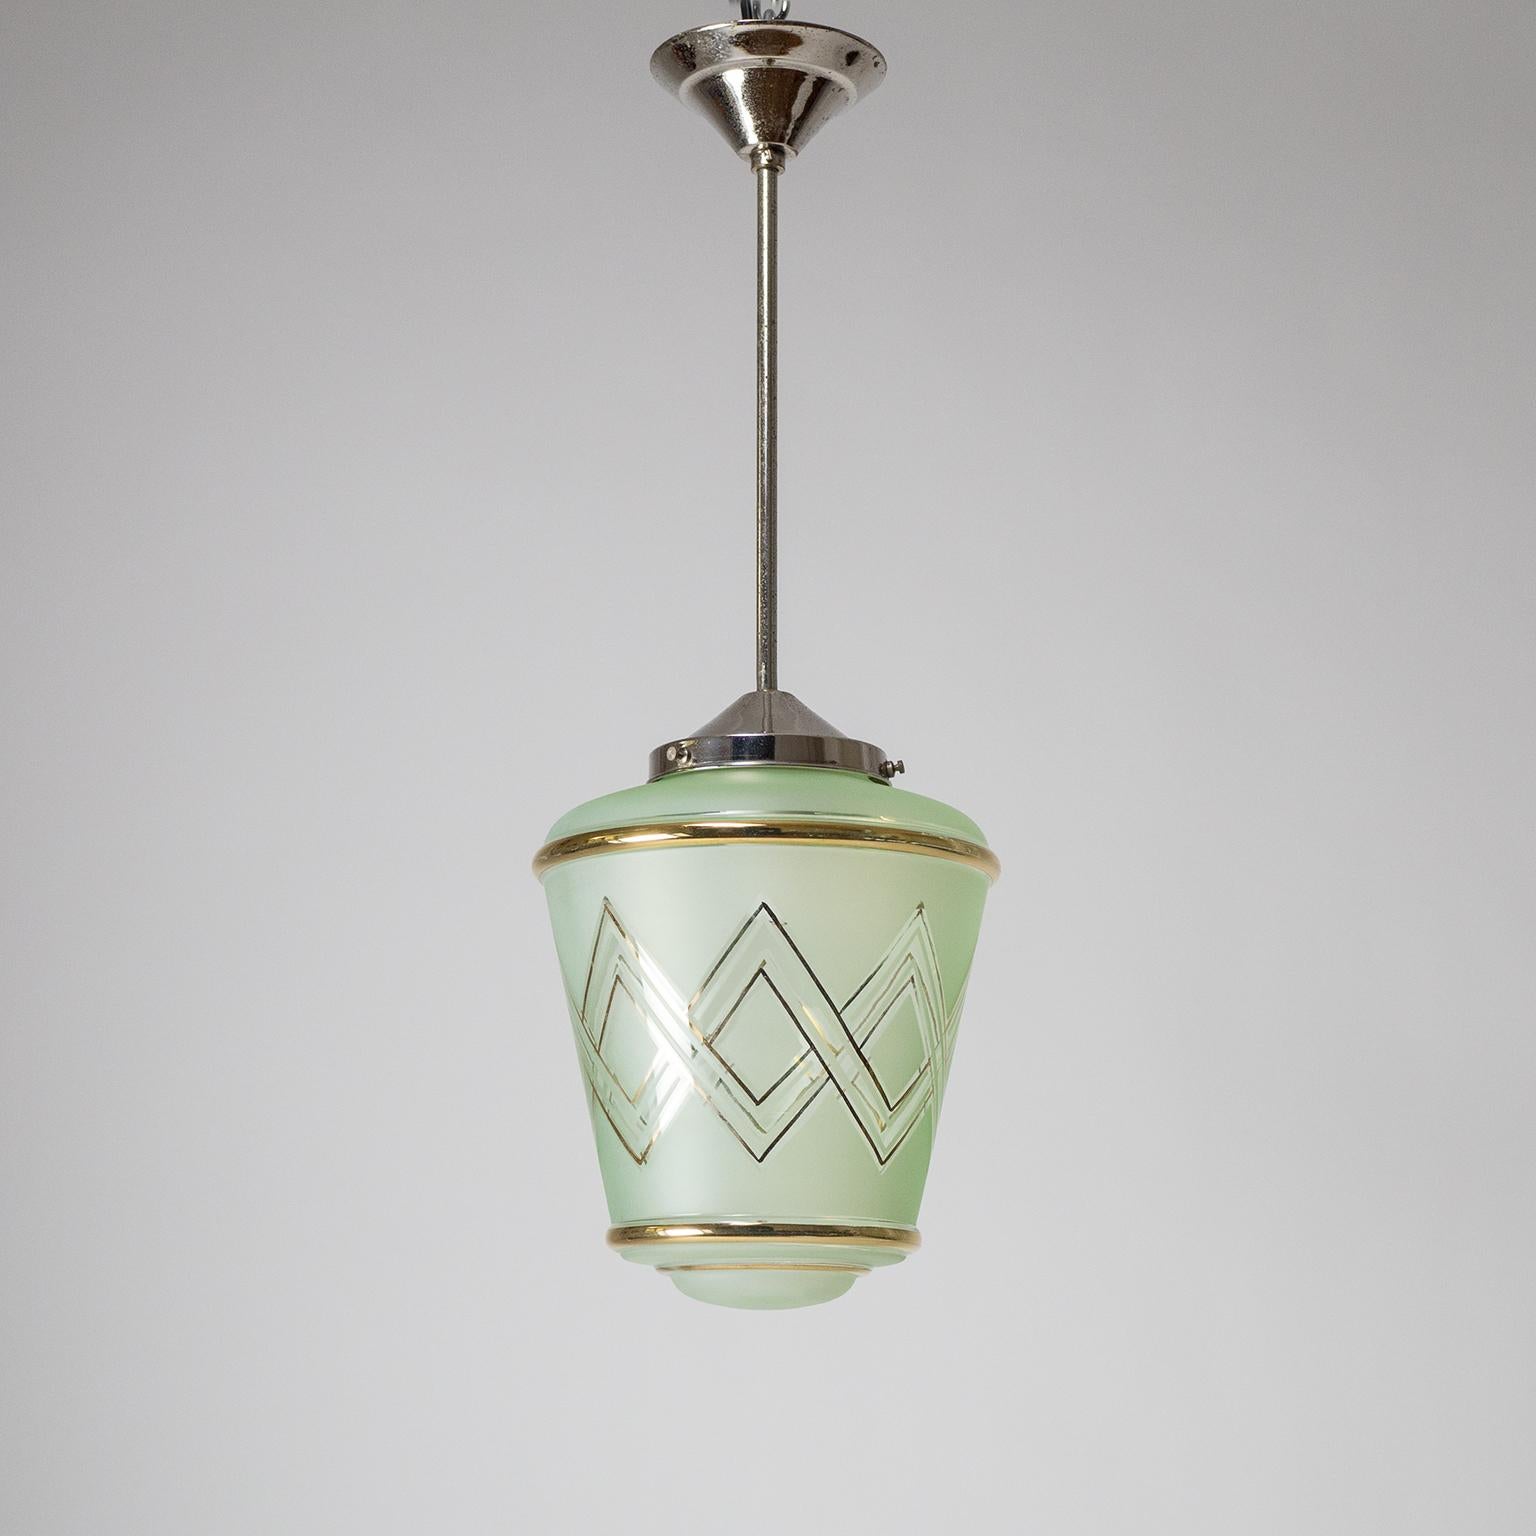 Lovely pair of French Art Deco pendants from the 1940s. Suspended from nickeled brass hardware are lantern-shaped blown glass diffusers with a mint green tint. The glass bodies are frosted on the outside with clear areas and gold paint in a